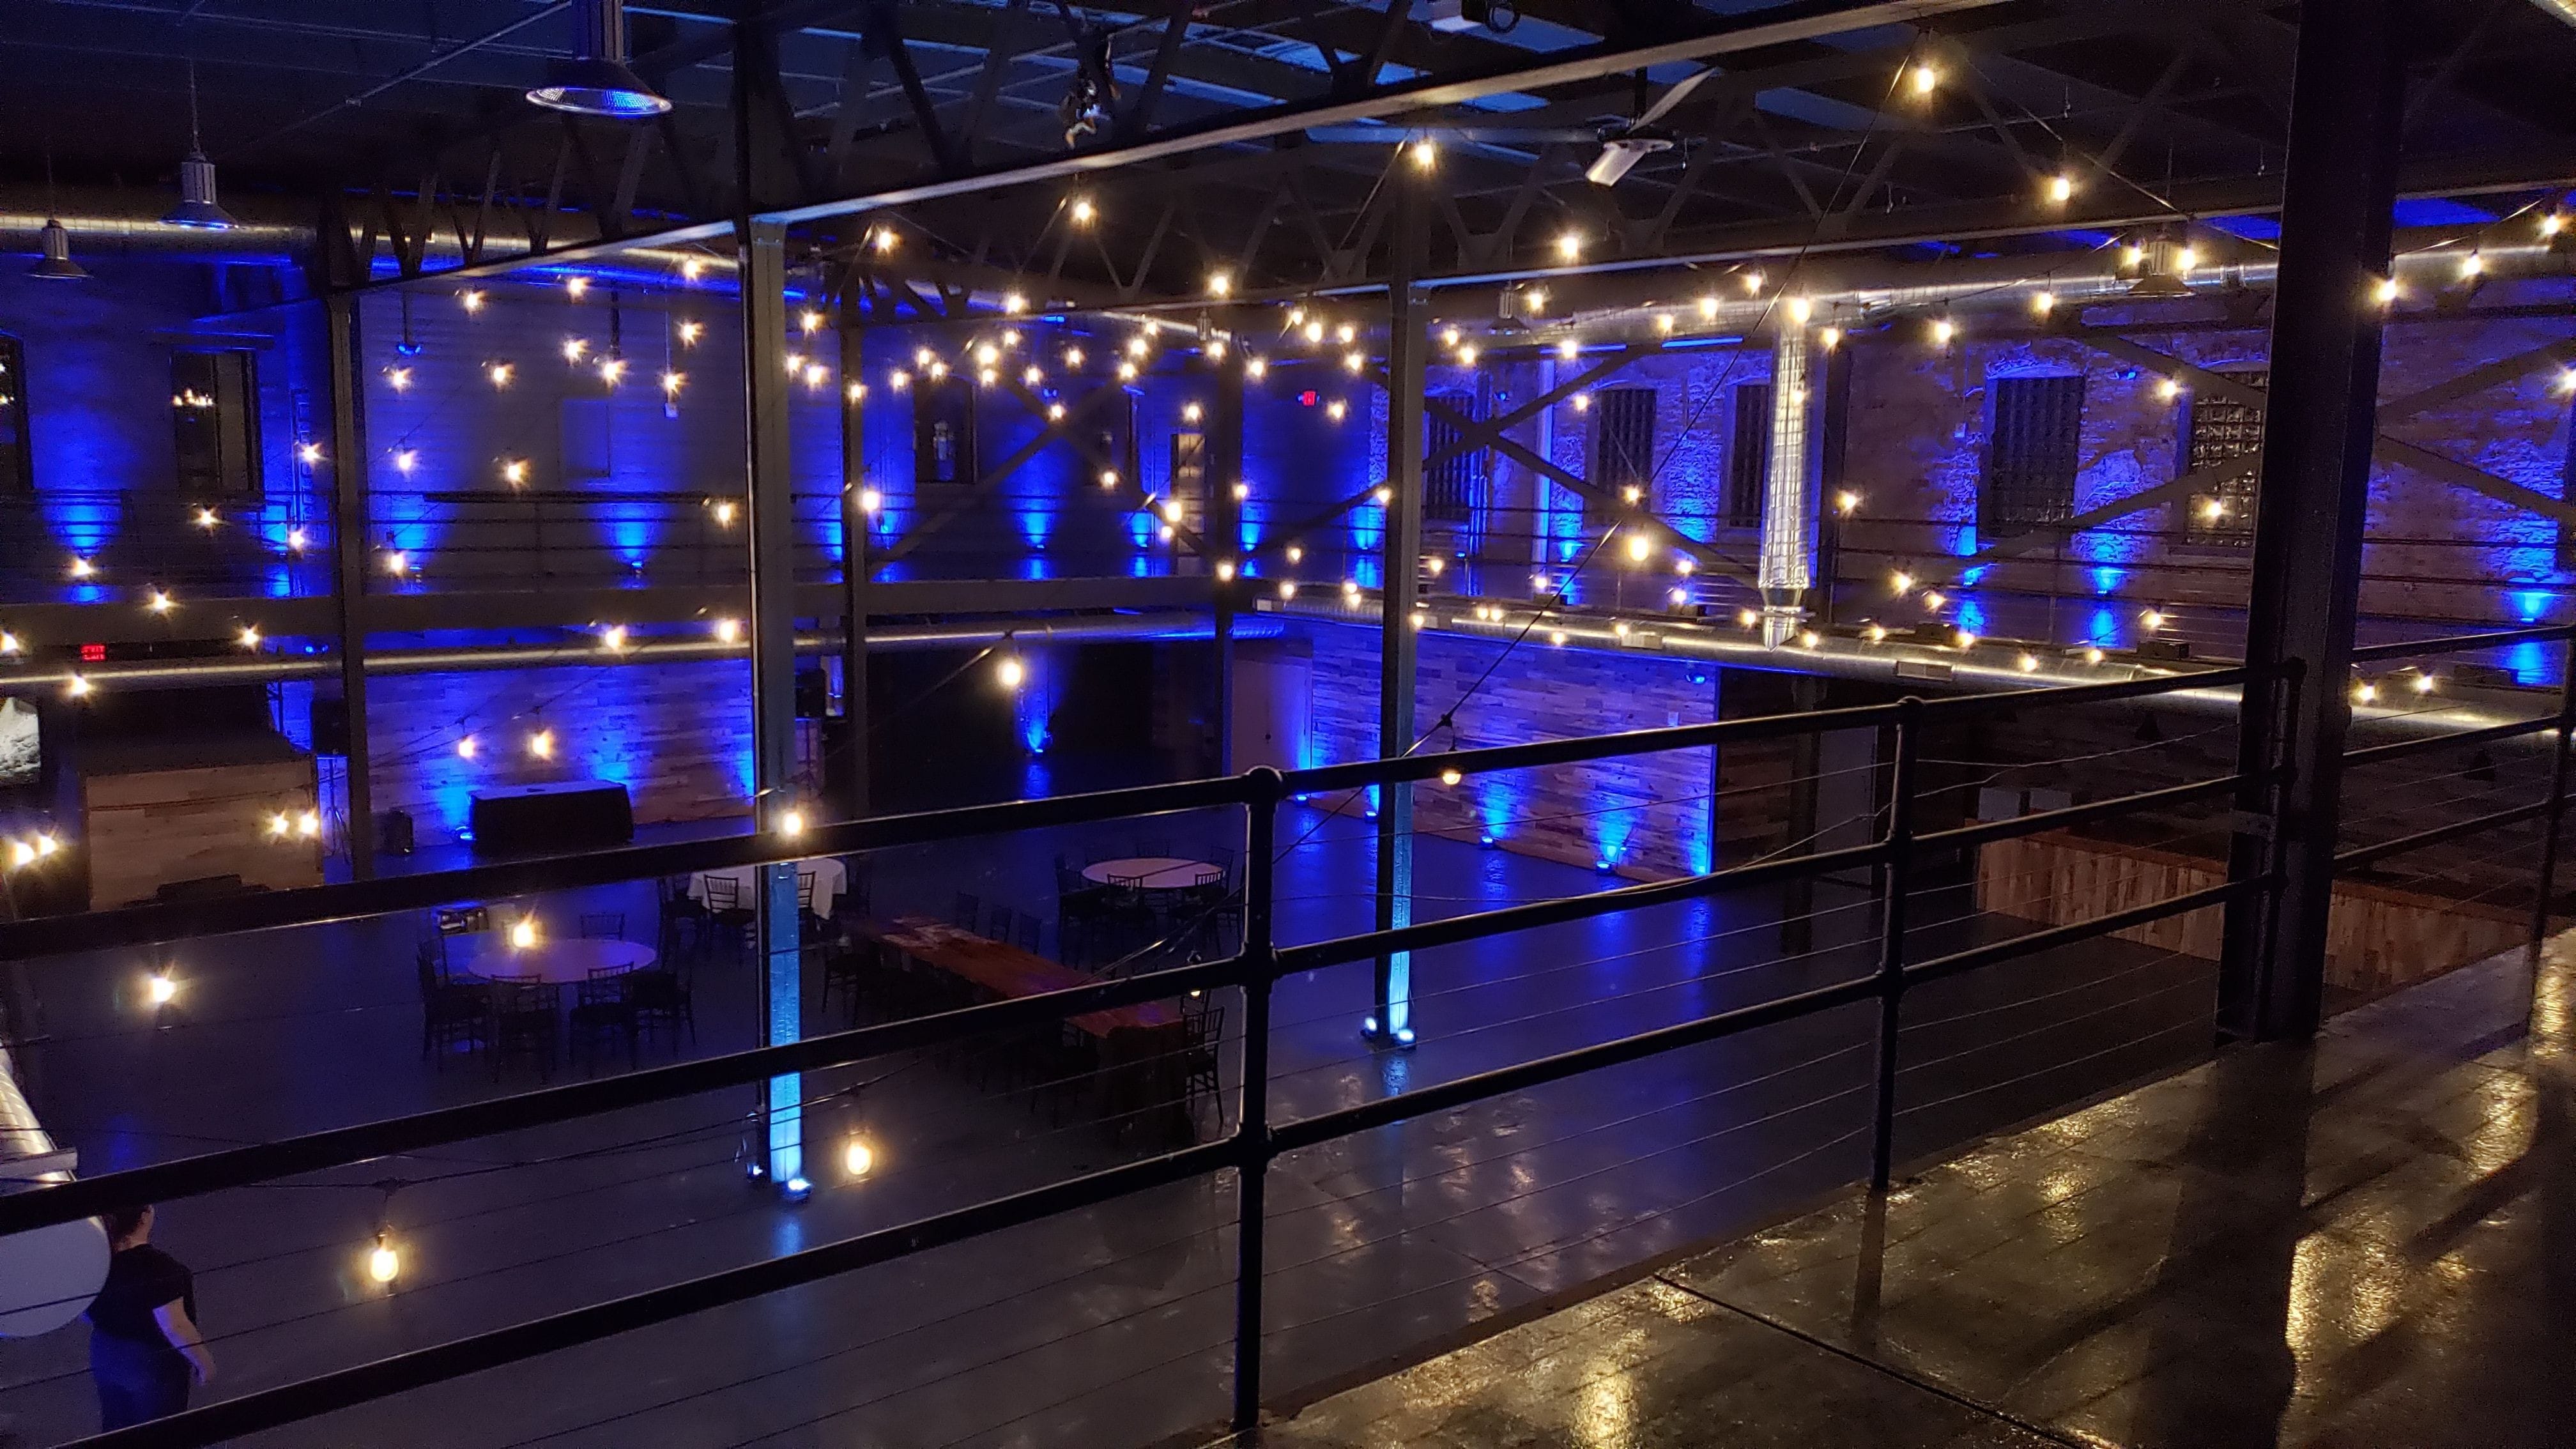 Wedding lighting at the Malting building. Up lighting in blue.